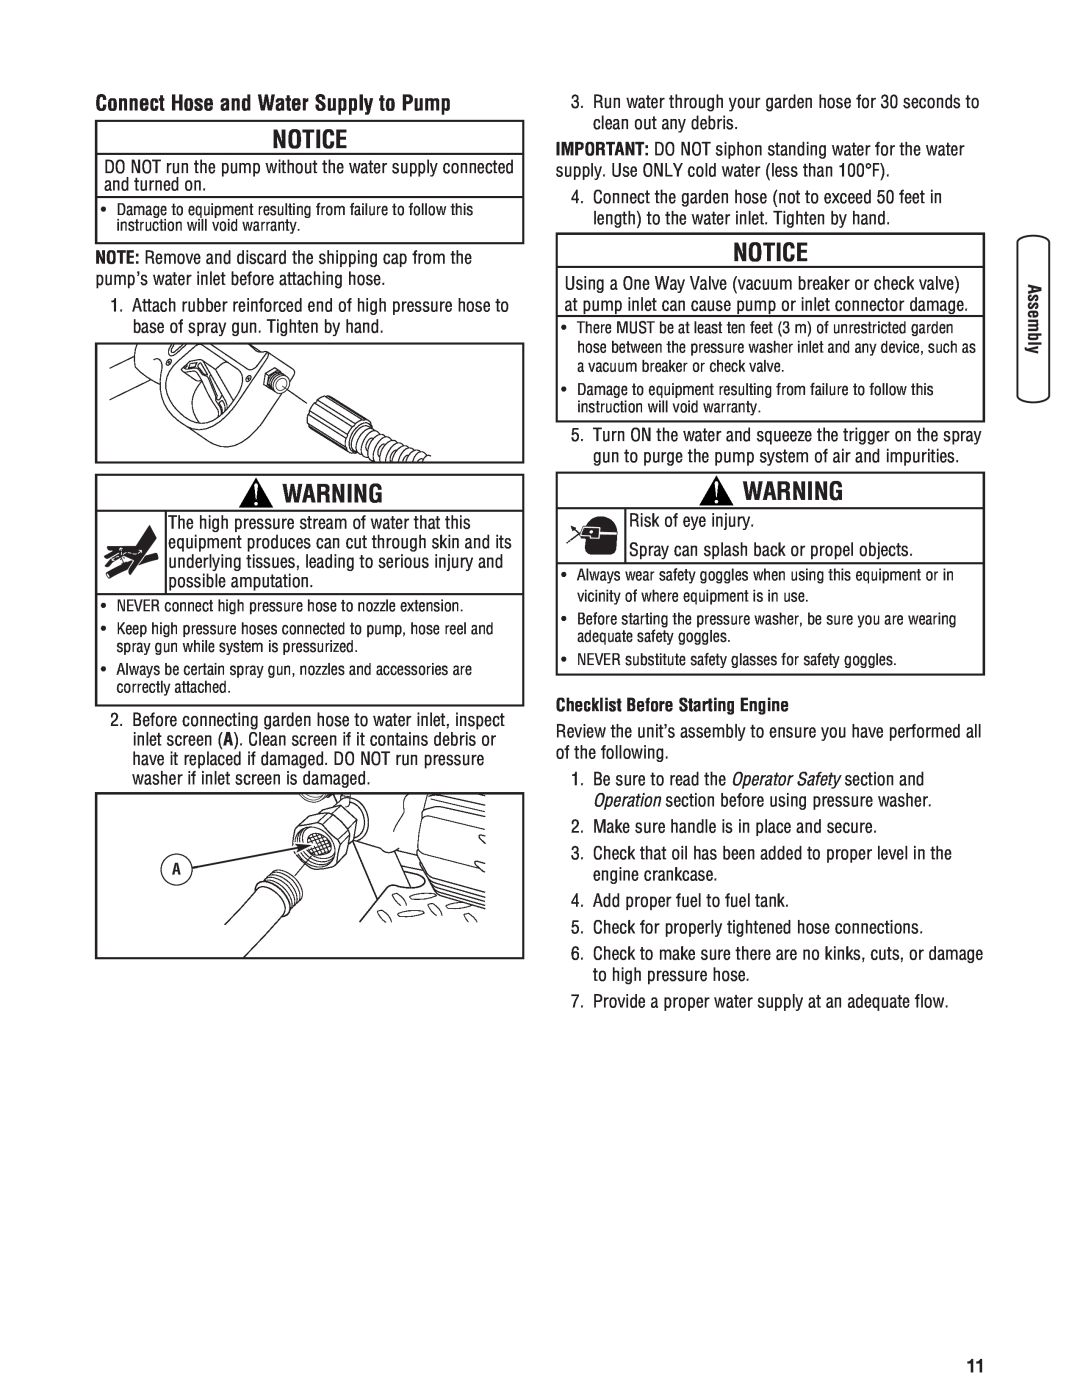 Briggs & Stratton 020364-0 manual Notice, Connect Hose and Water Supply to Pump, Checklist Before Starting Engine 